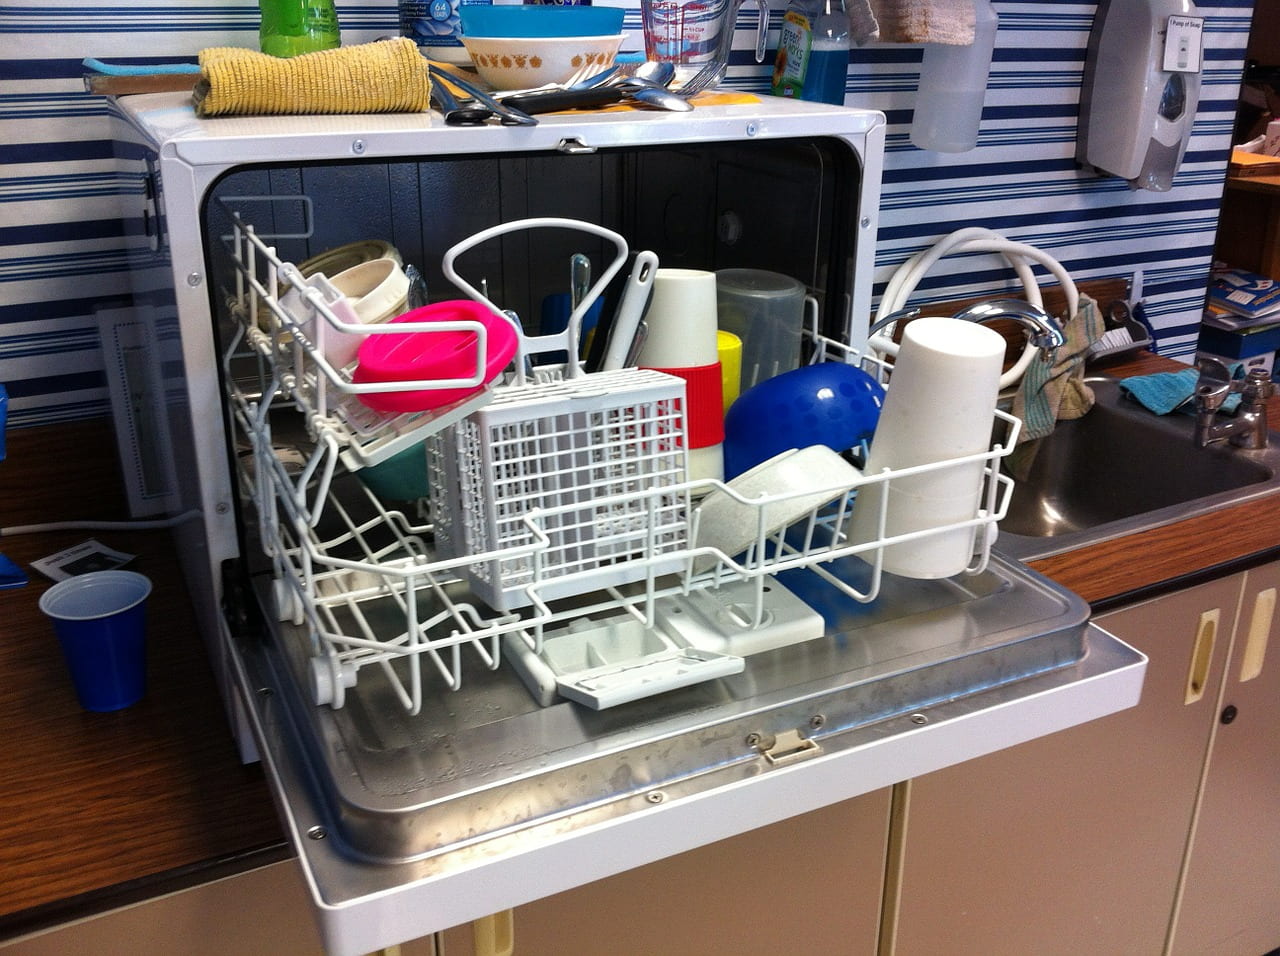 A dishwasher sitting on a shelf that is open and showing itself as being full of dishes.